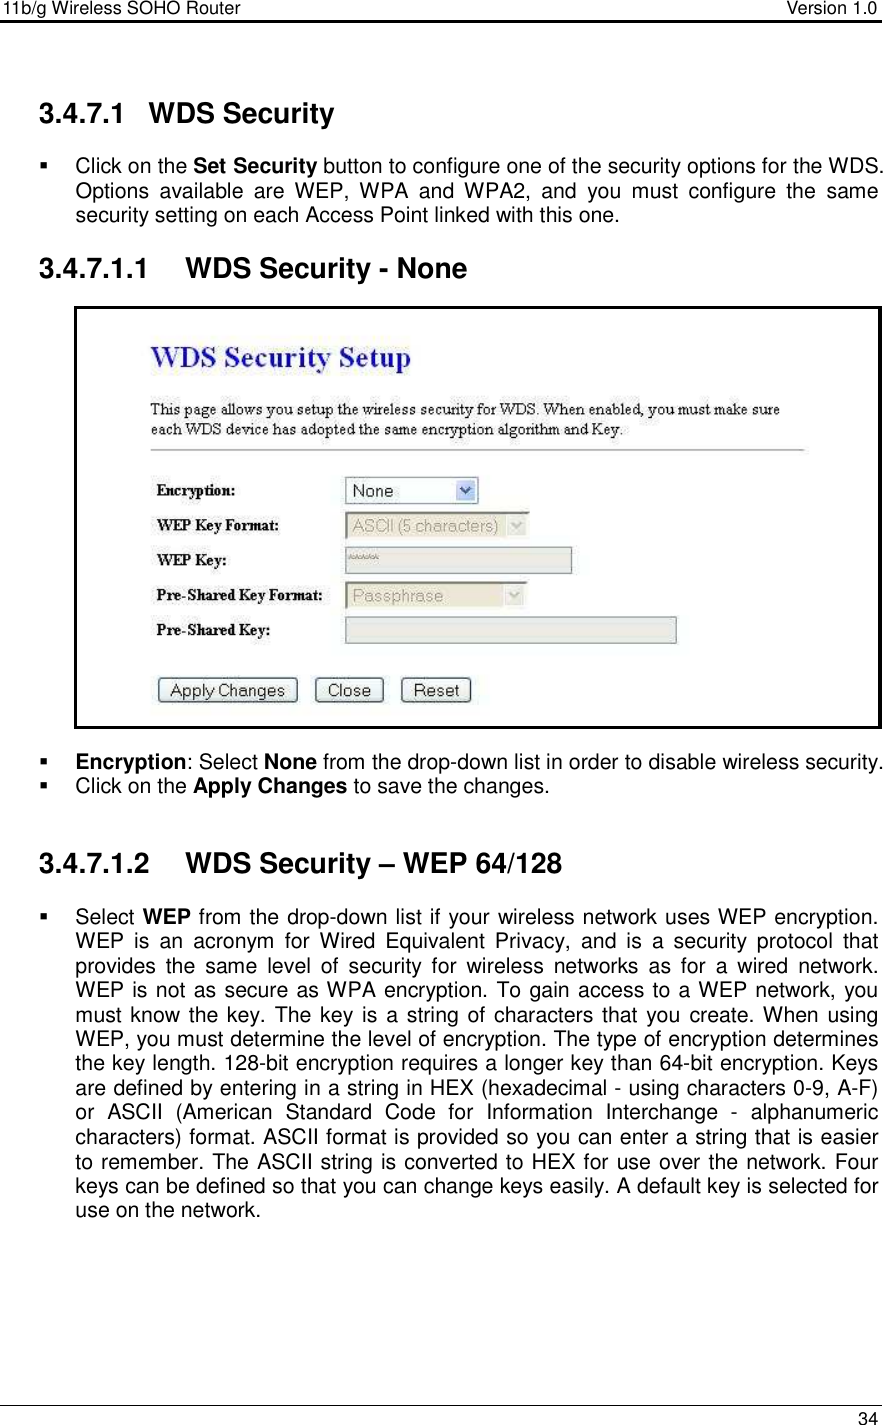 11b/g Wireless SOHO Router                                     Version 1.0    34   3.4.7.1  WDS Security    Click on the Set Security button to configure one of the security options for the WDS. Options  available  are  WEP,  WPA  and  WPA2,  and  you  must  configure  the  same security setting on each Access Point linked with this one.   3.4.7.1.1  WDS Security - None                    Encryption: Select None from the drop-down list in order to disable wireless security.    Click on the Apply Changes to save the changes.    3.4.7.1.2  WDS Security – WEP 64/128    Select WEP from the drop-down list if your wireless network uses WEP encryption. WEP  is  an  acronym  for  Wired  Equivalent  Privacy,  and  is  a  security  protocol  that provides  the  same  level  of  security  for  wireless  networks  as  for  a  wired  network.  WEP is not as secure as WPA encryption. To gain access to a WEP network, you must know the key. The key is  a string of characters that you create. When using WEP, you must determine the level of encryption. The type of encryption determines the key length. 128-bit encryption requires a longer key than 64-bit encryption. Keys are defined by entering in a string in HEX (hexadecimal - using characters 0-9, A-F) or  ASCII  (American  Standard  Code  for  Information  Interchange  -  alphanumeric characters) format. ASCII format is provided so you can enter a string that is easier to remember. The ASCII string is converted to HEX for use over the network. Four keys can be defined so that you can change keys easily. A default key is selected for use on the network.  